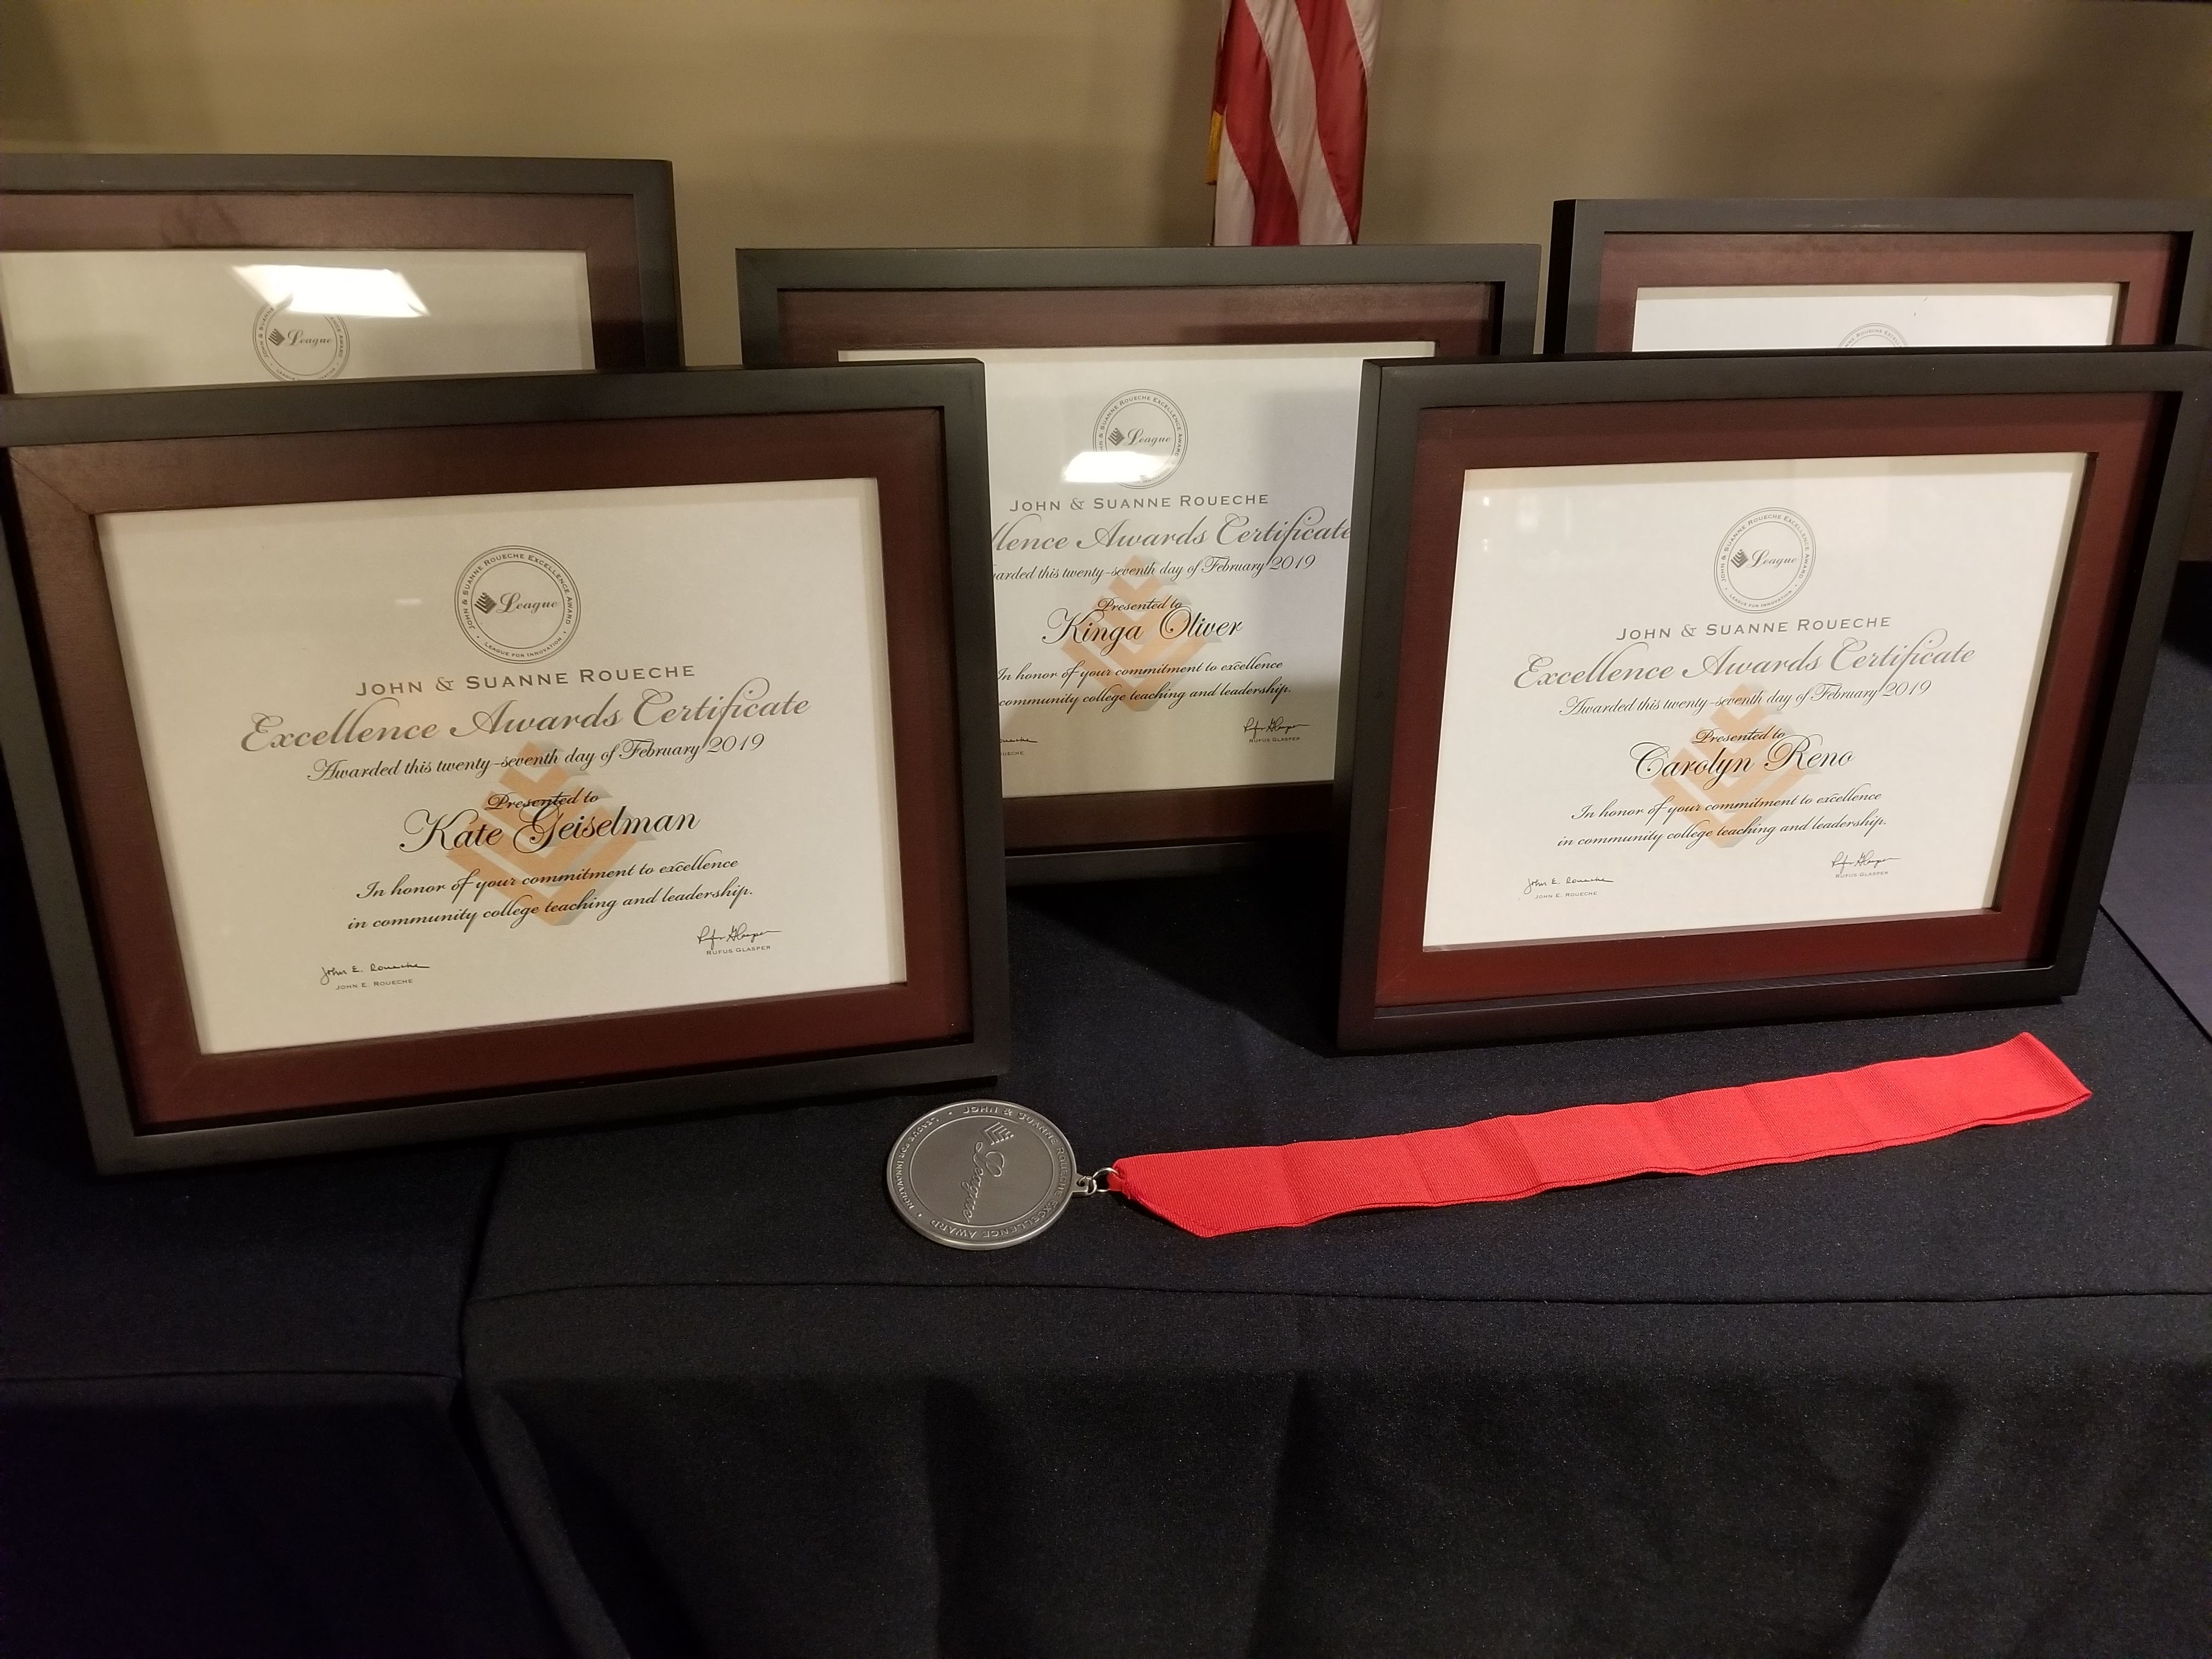 2019 Faculty Awards winners plaques